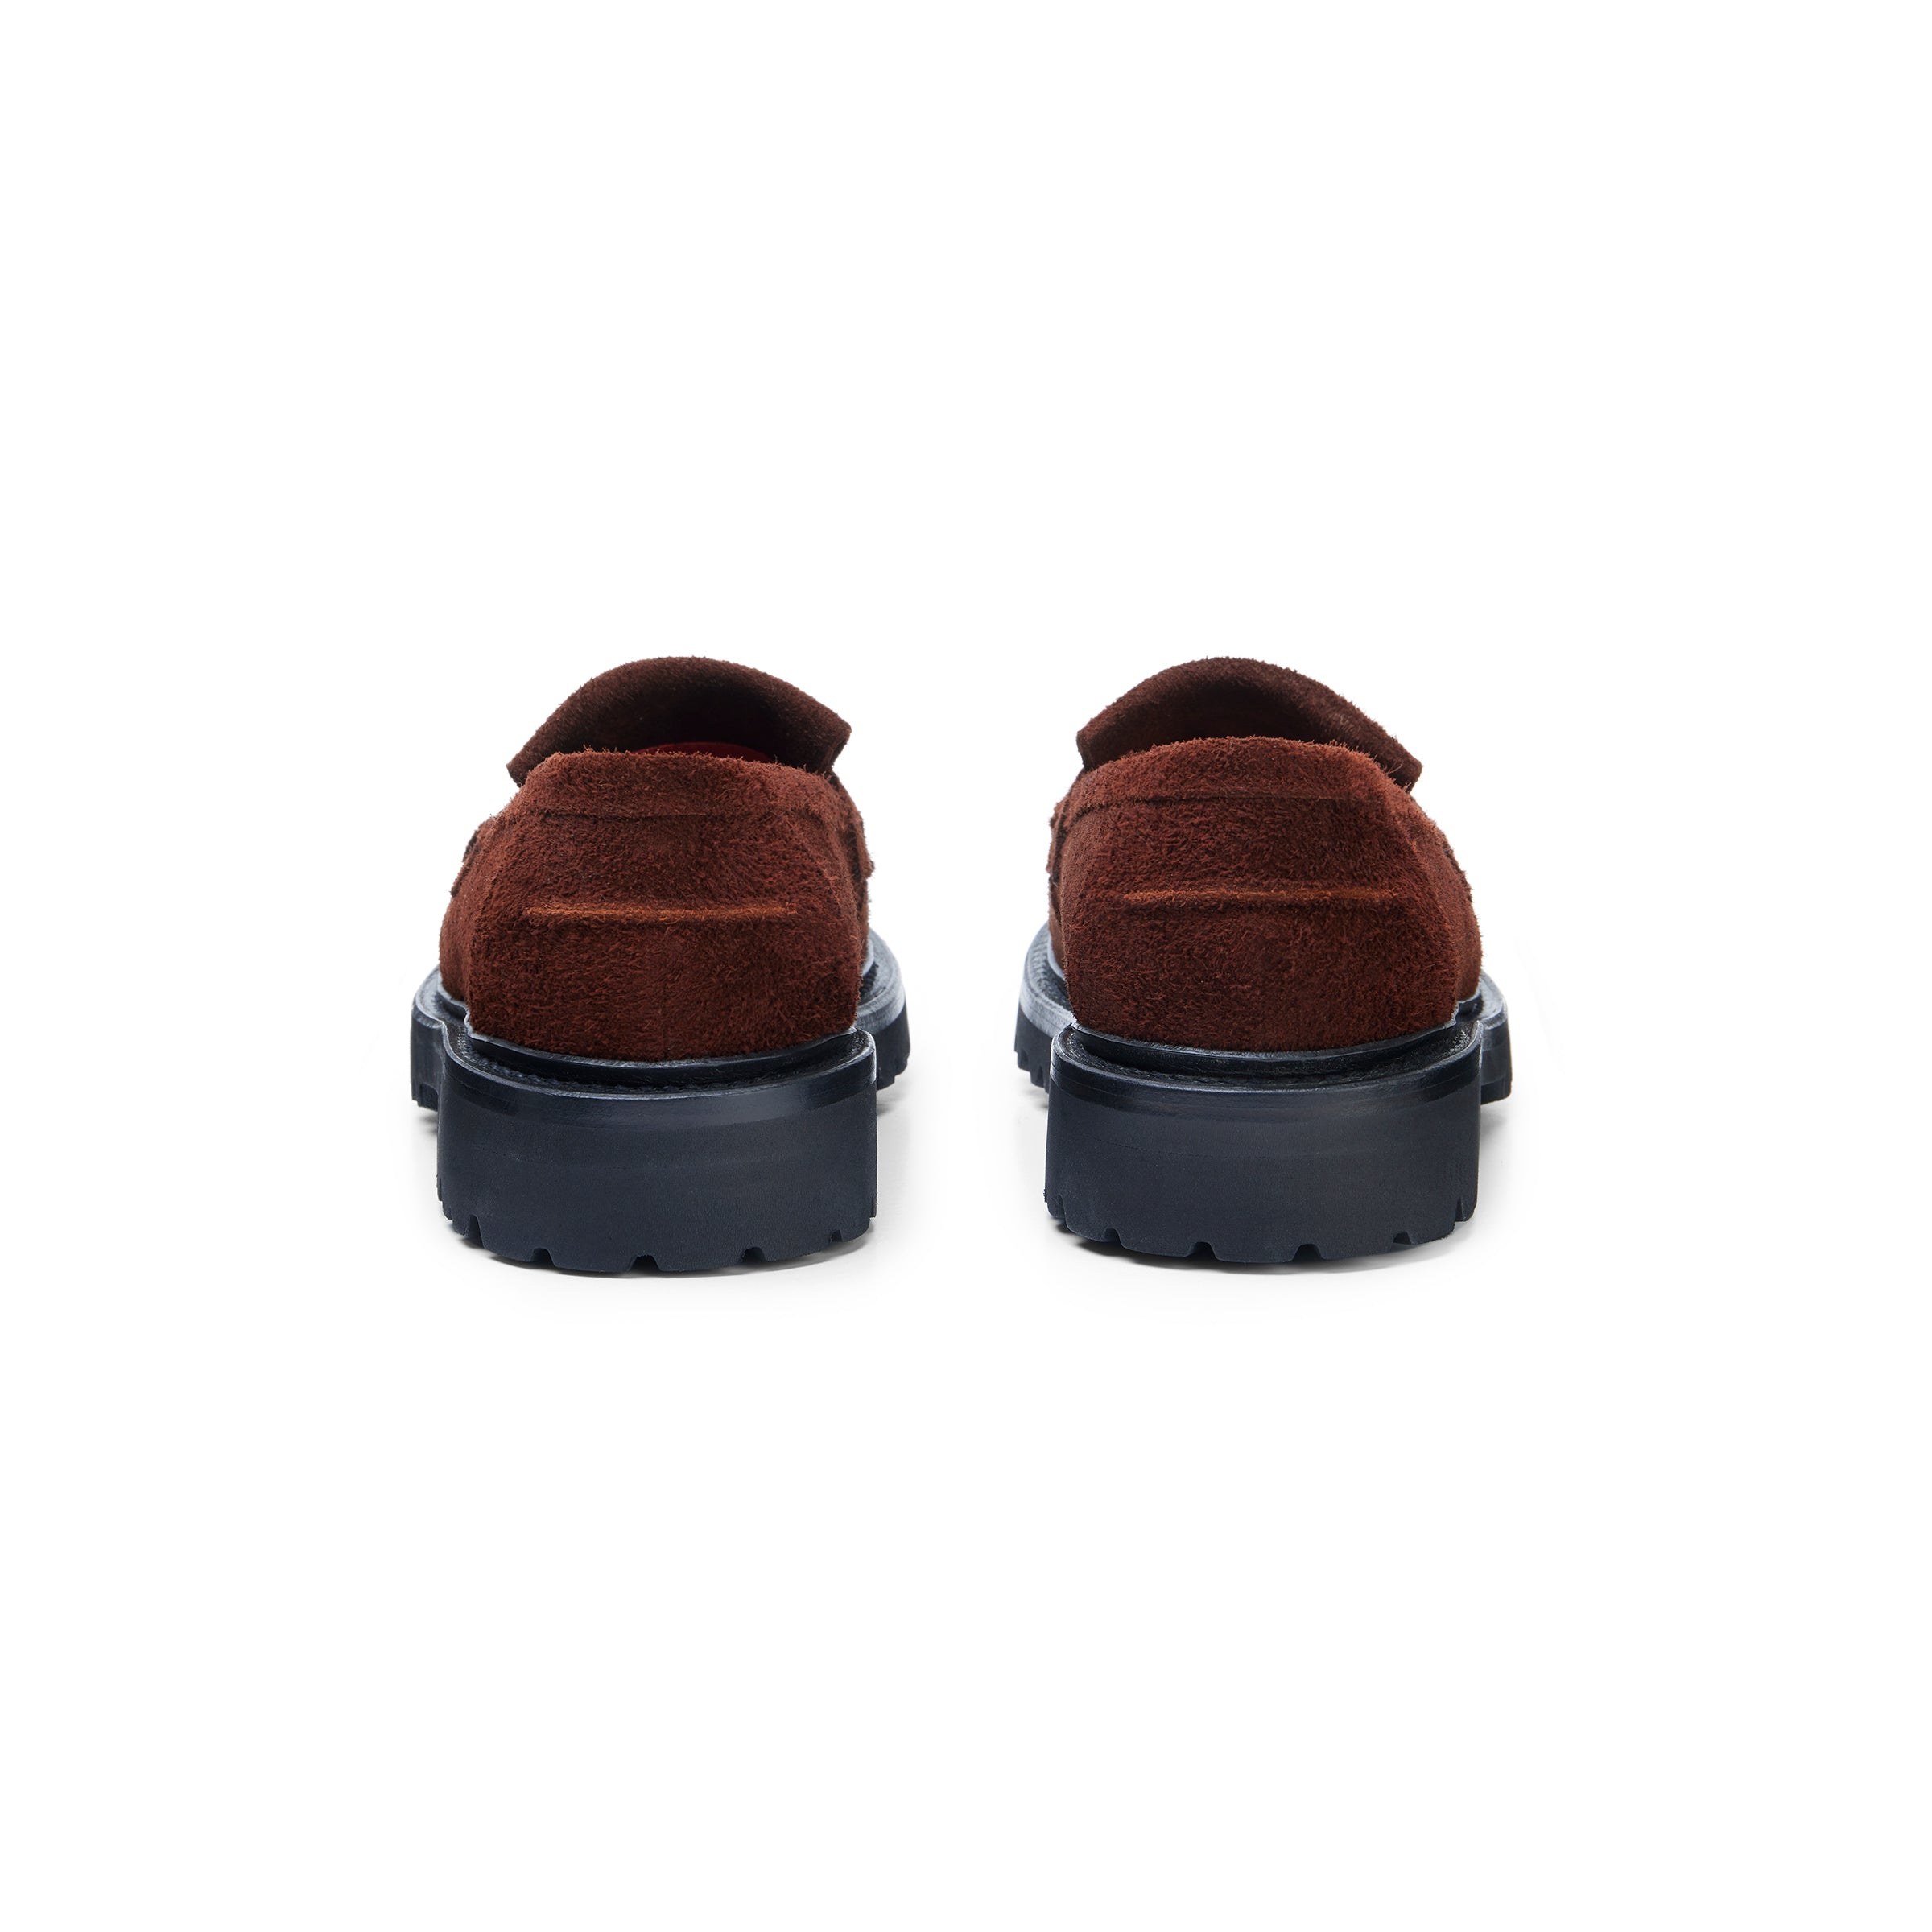 The Kiltie Loafer Exclusively for Academy, Chestnut